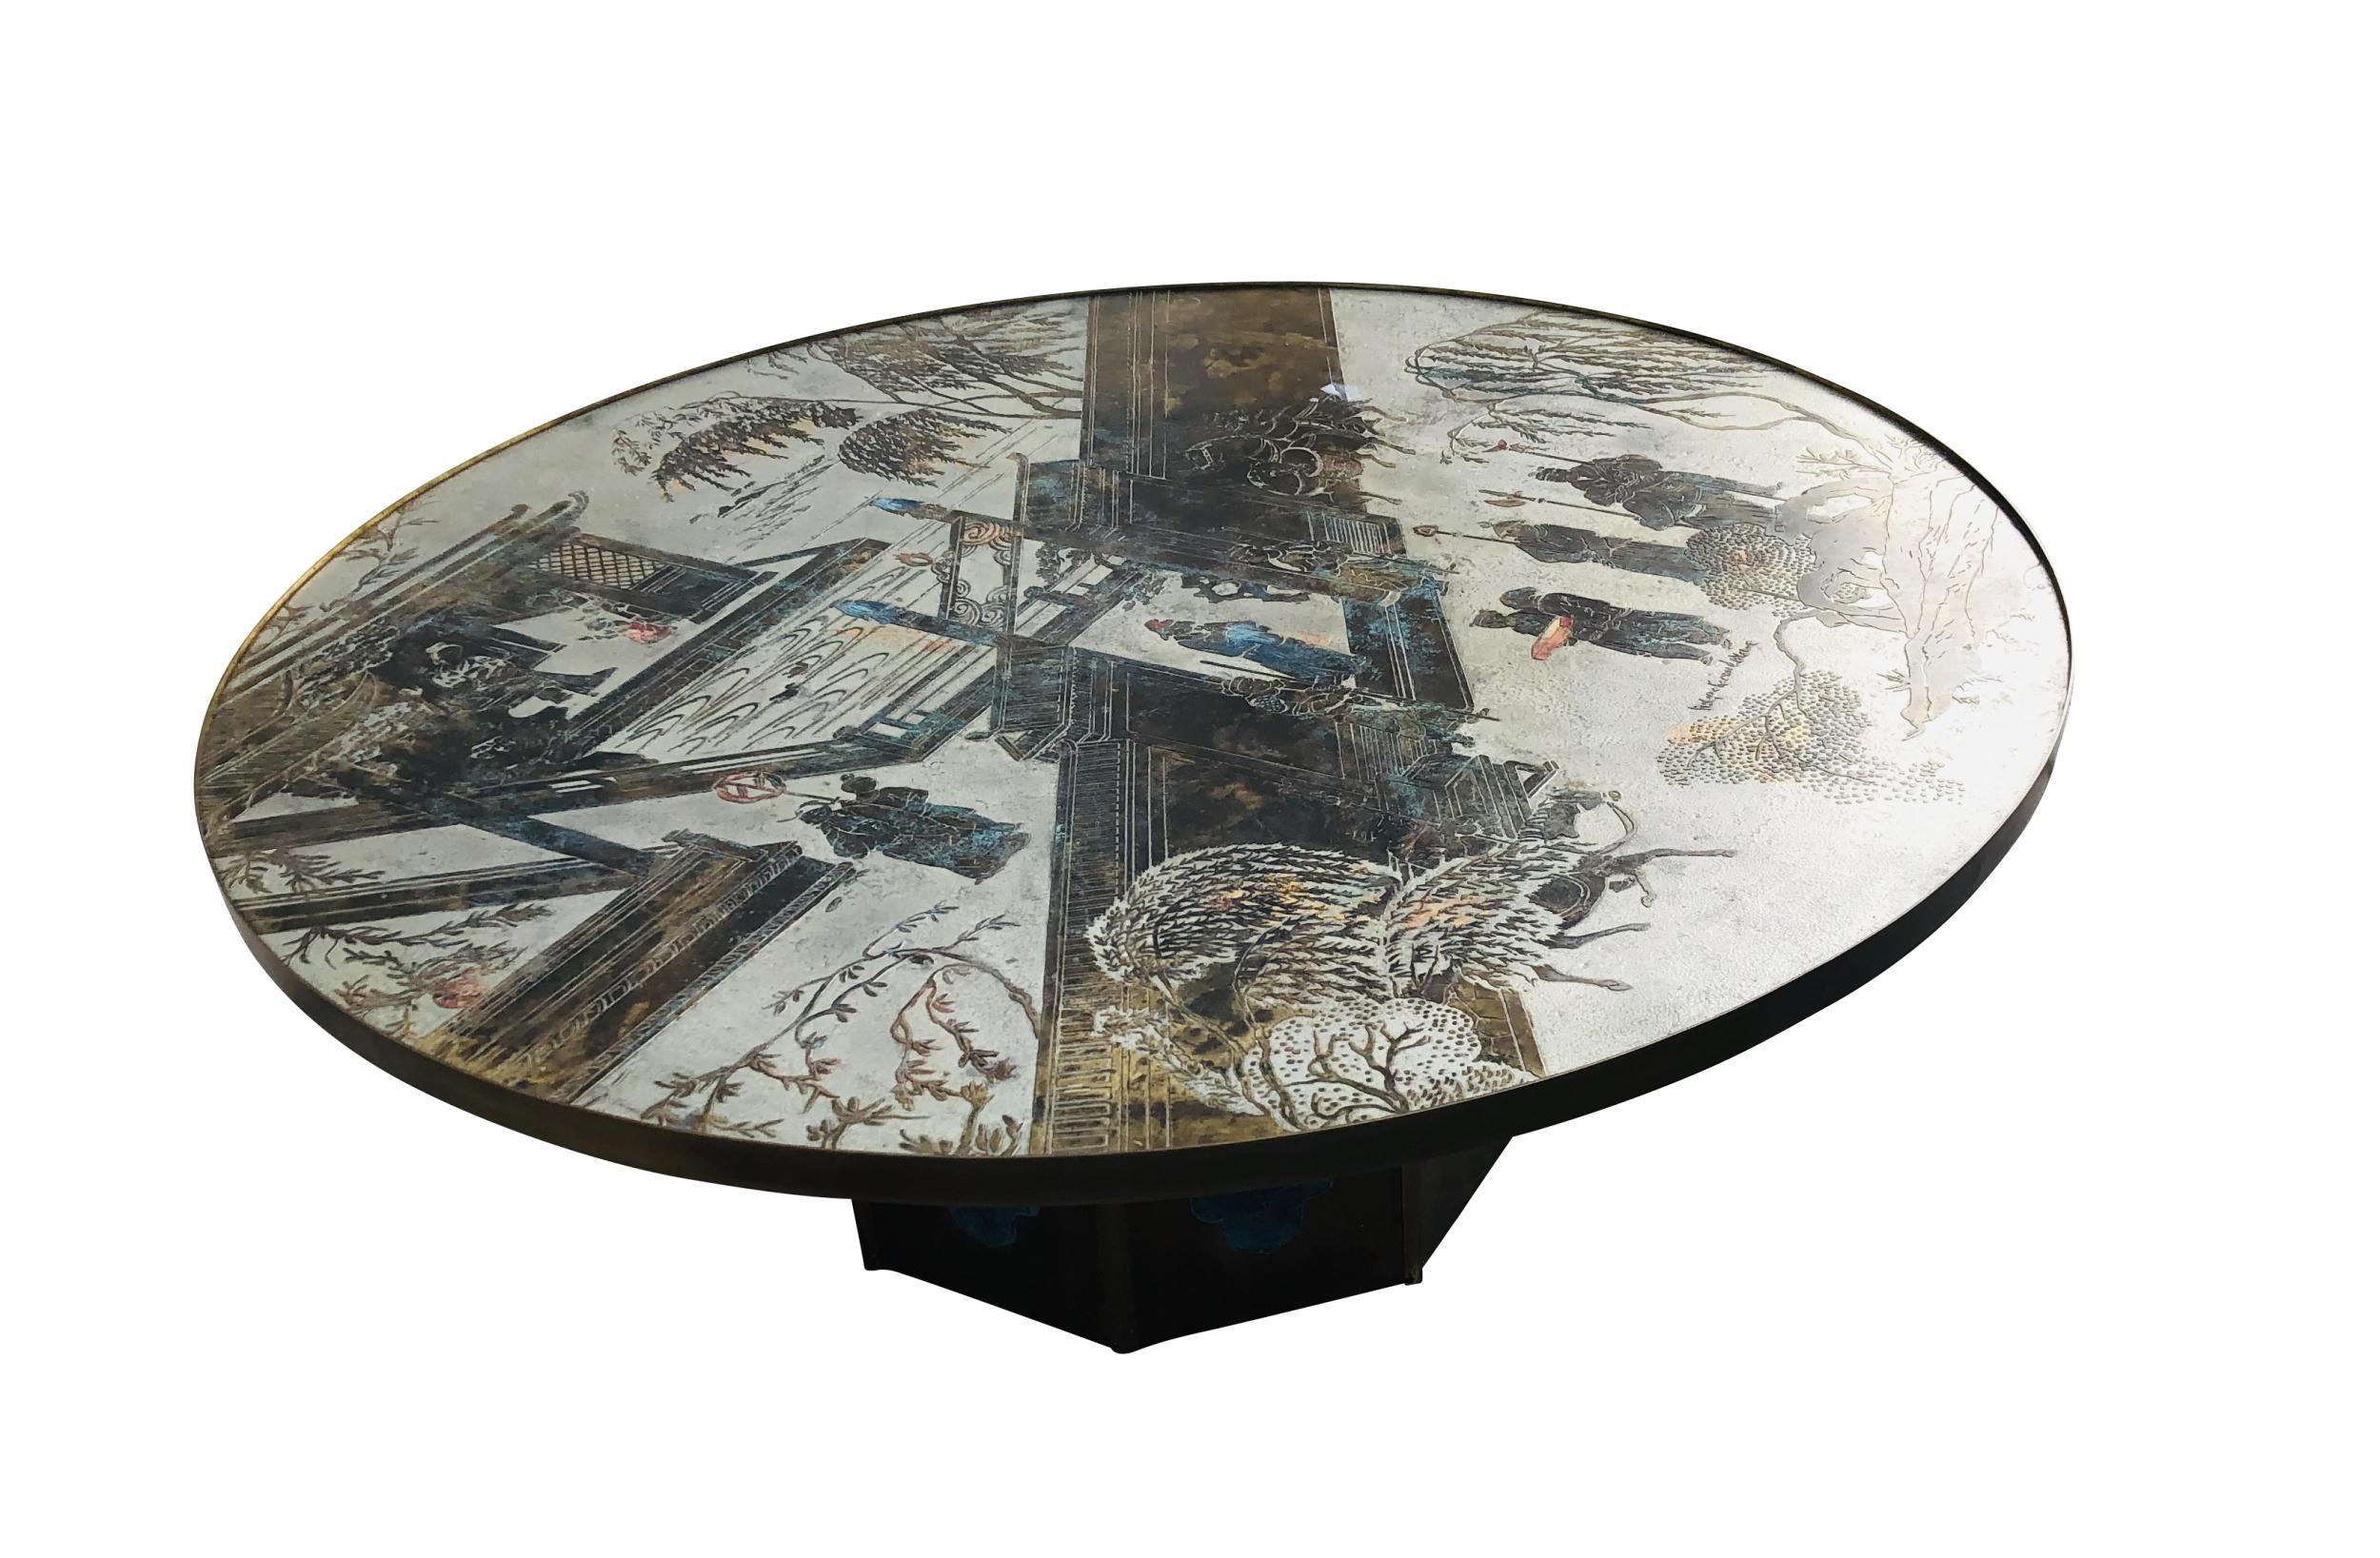 Chan coffee table by Philip and Kelvin LaVerne. Beautiful polychrome design over bronze with blue or green finish inset base.